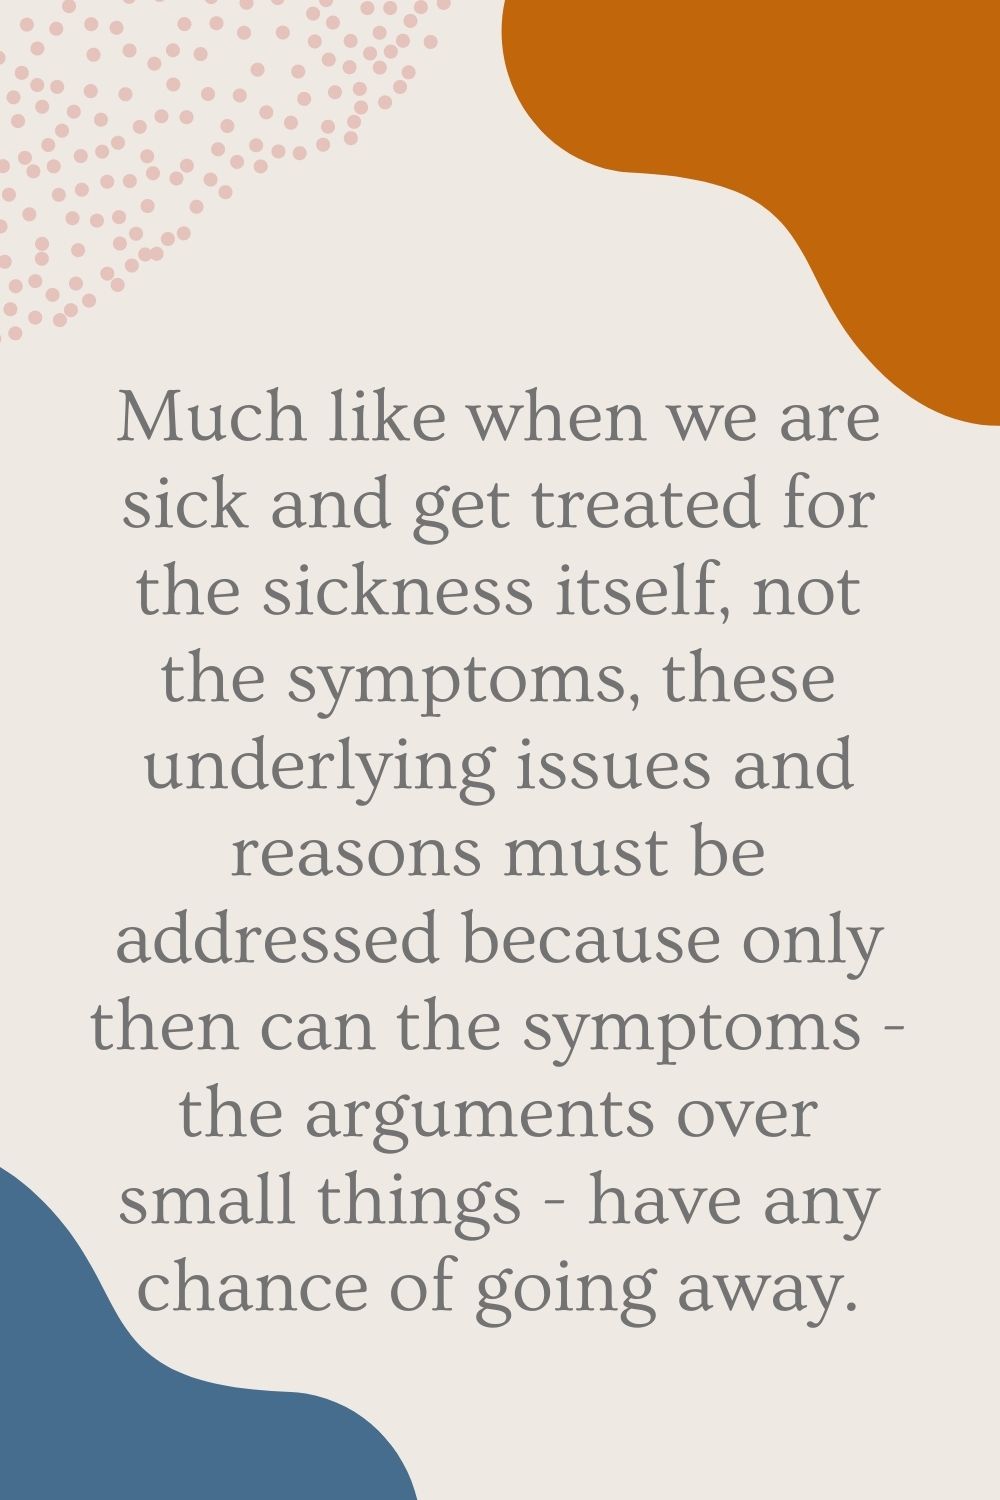 Much like when we are sick and get treated for the sickness itself, not the symptoms, these underlying issues and reasons must be addressed because only then can the symptoms - the arguments over small things - have any chance of going away.